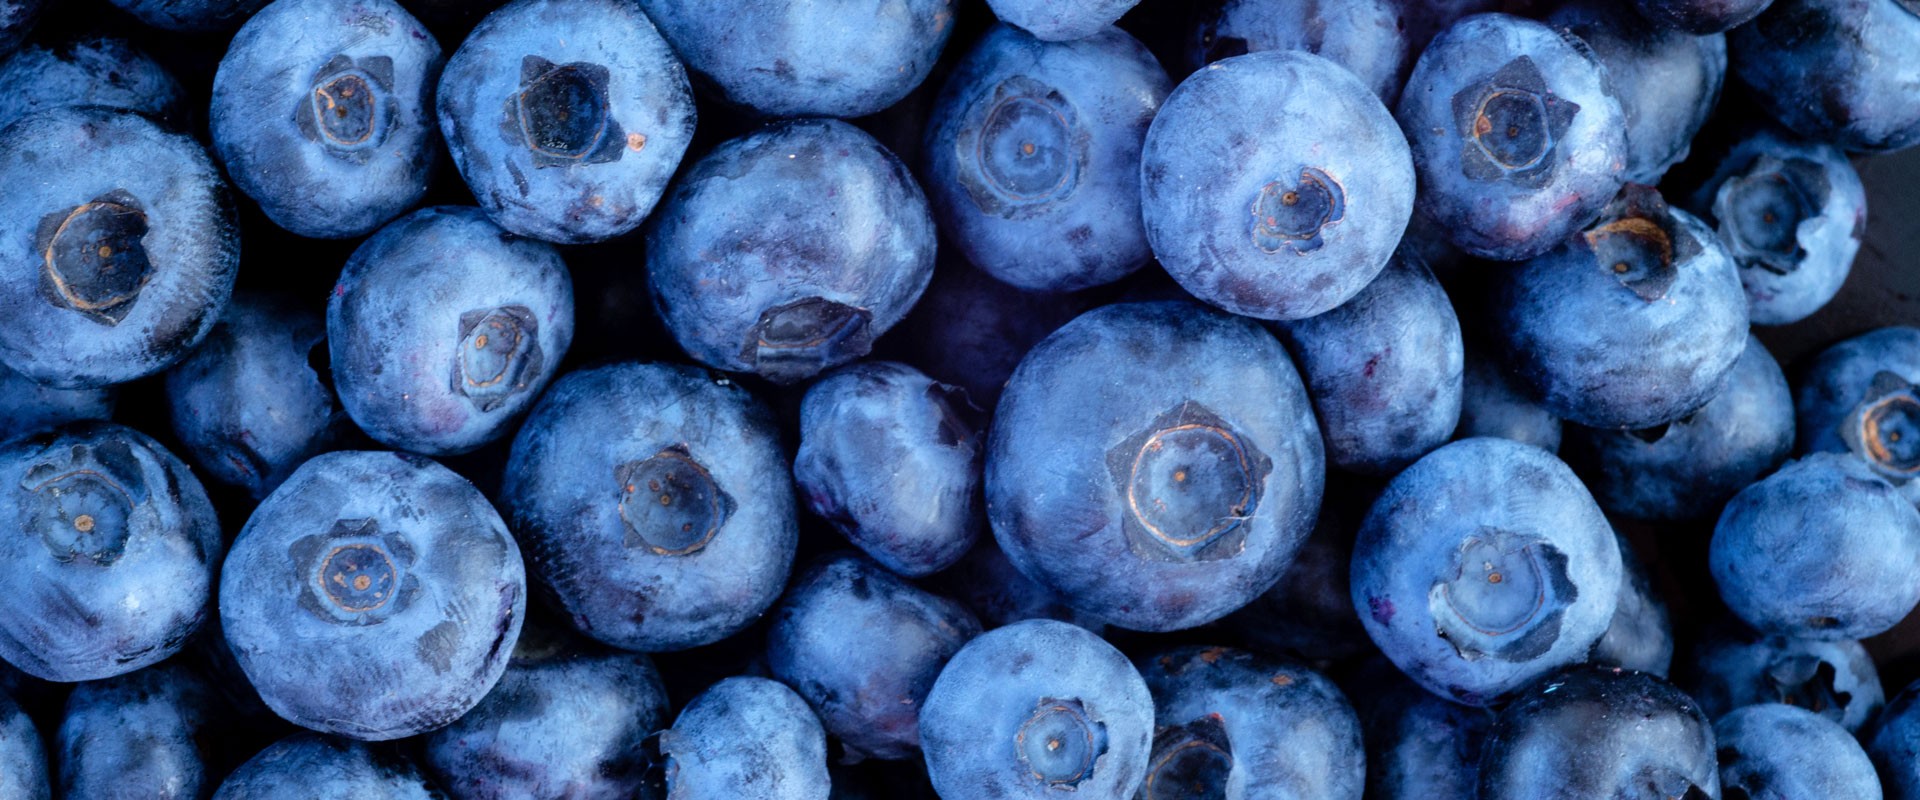 Blueberries-Product